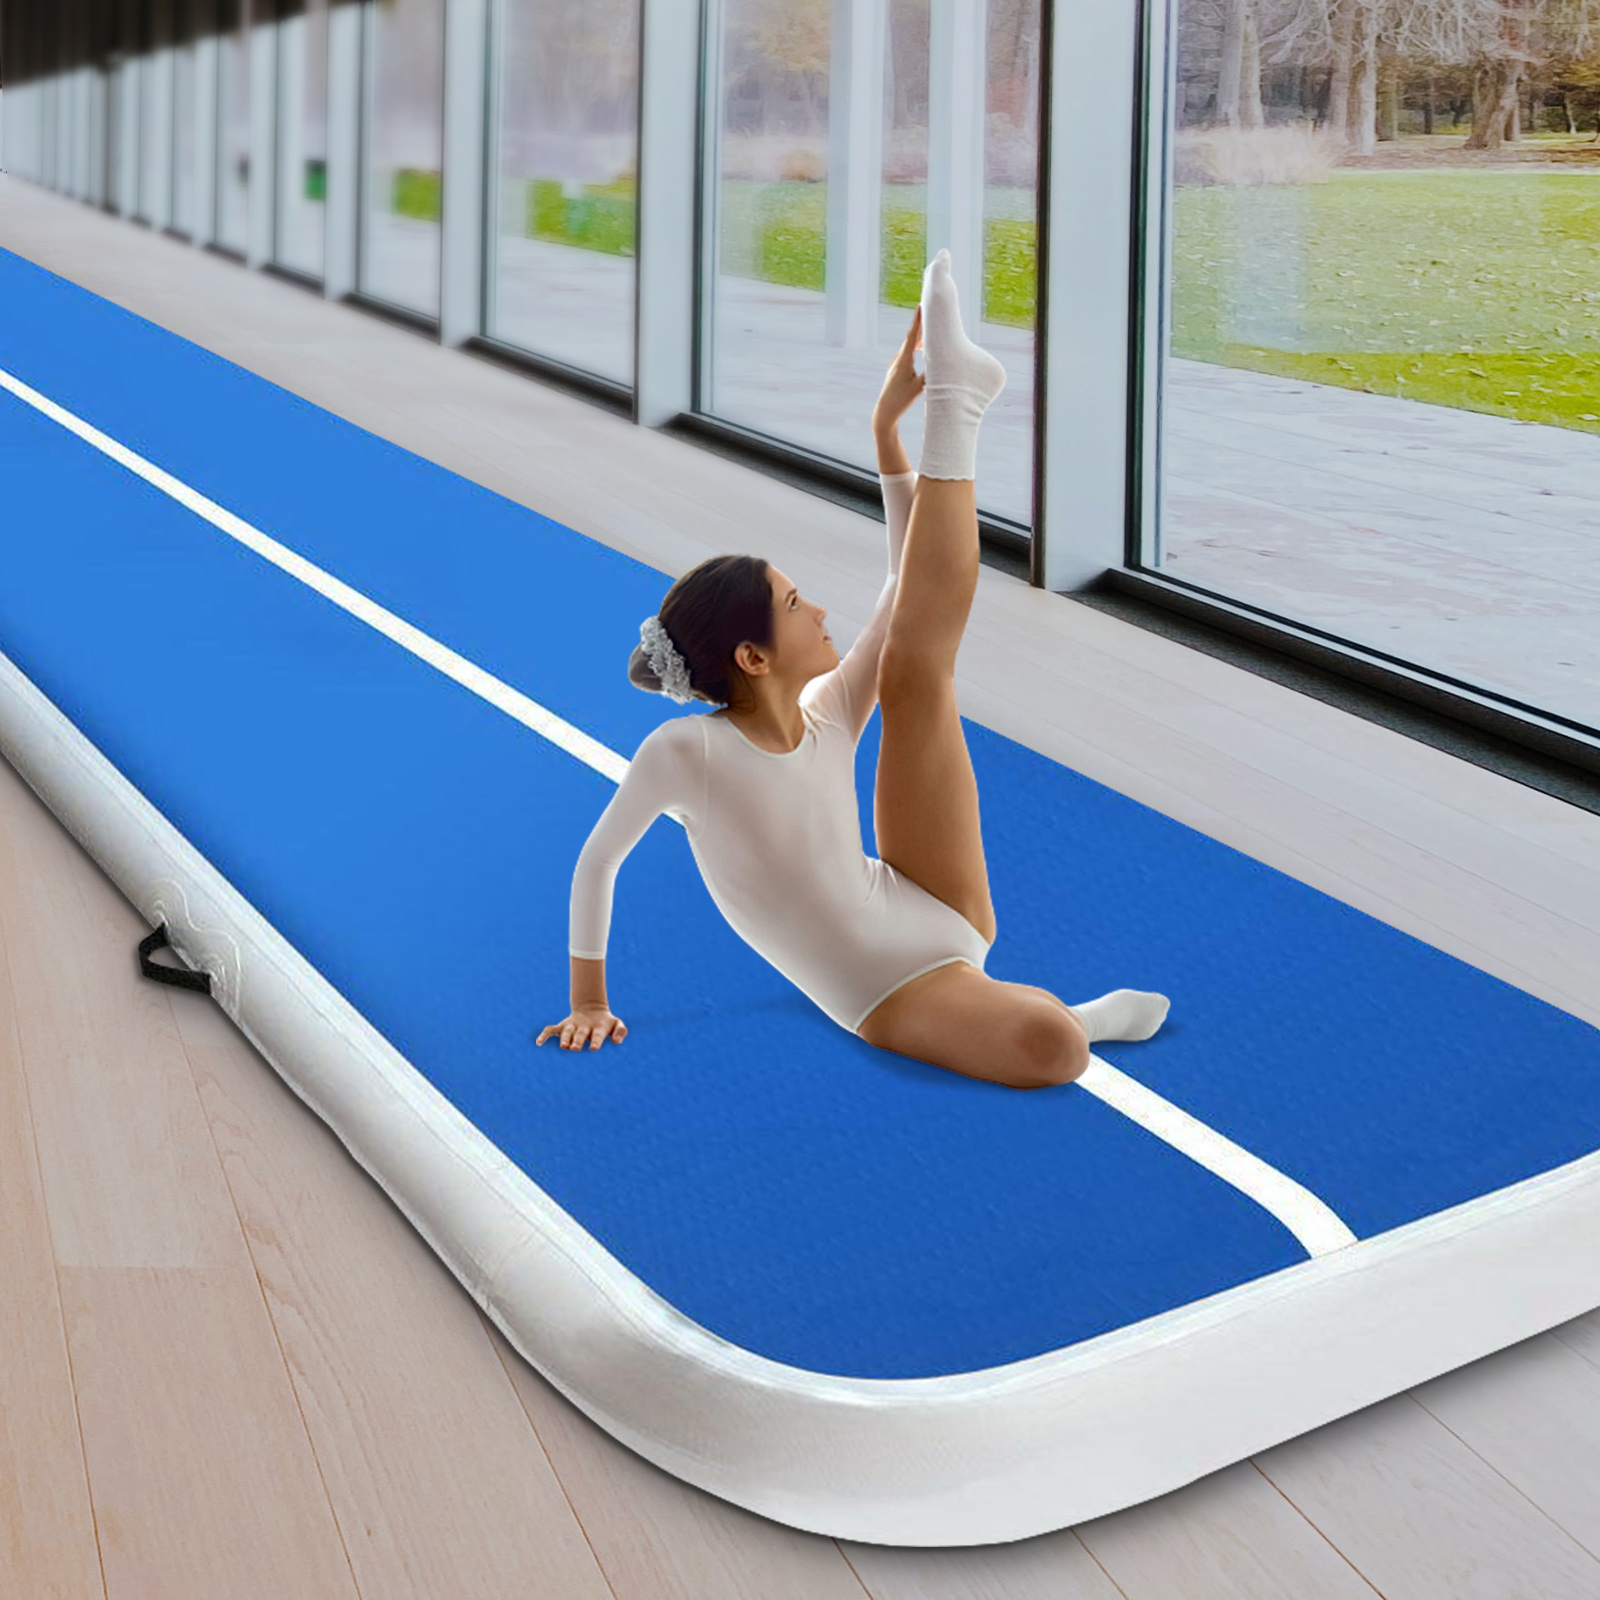 Inflatable Air Track Mat 20cm Thick Gymnastic Tumbling Blue And White 5m x 1m